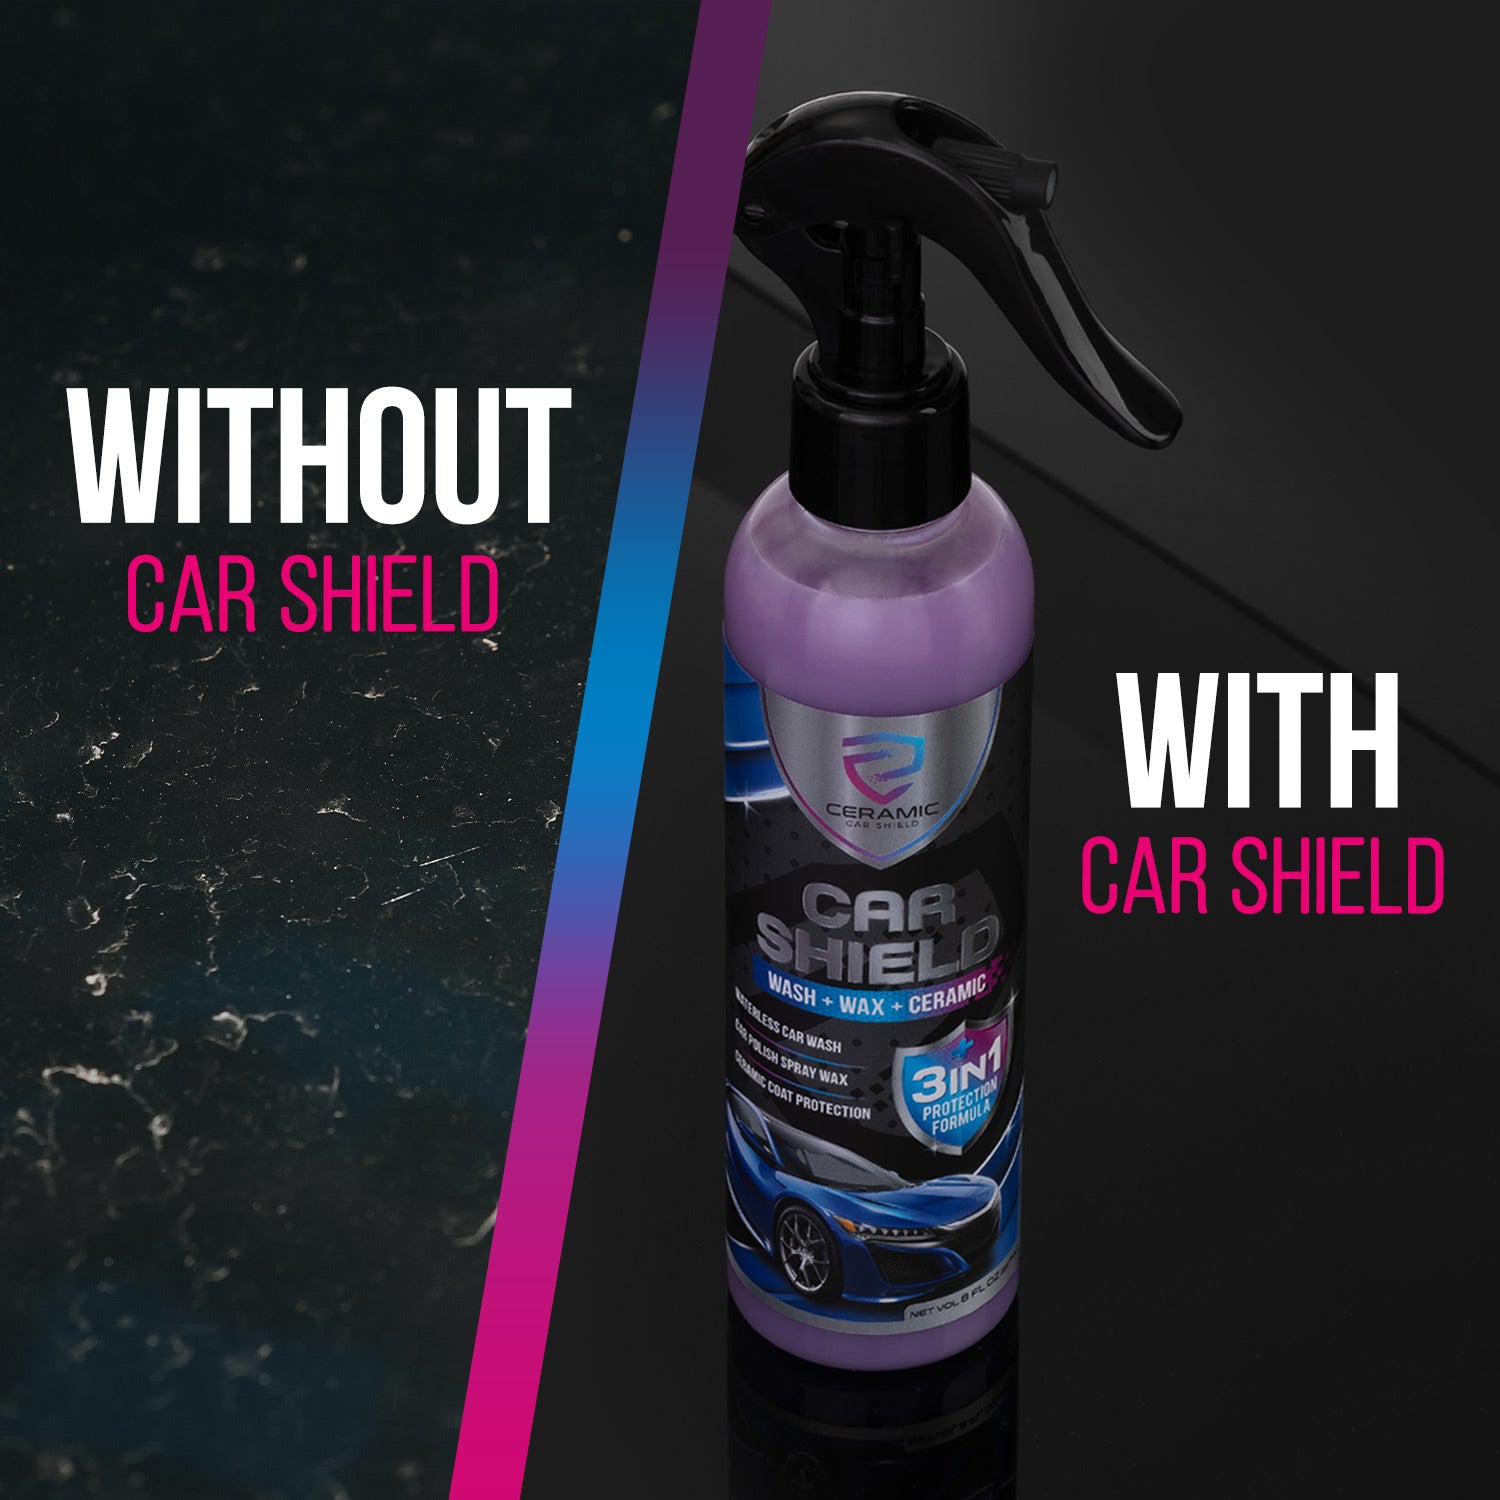 Ceramic Wax Spray, Hydrophobic Ceramic Coating 3-in-1 SiO2 Quick Detailer,  Waterless Ceramic Car Wash and Wax, Best Top Coat Spray to Detail, Clean